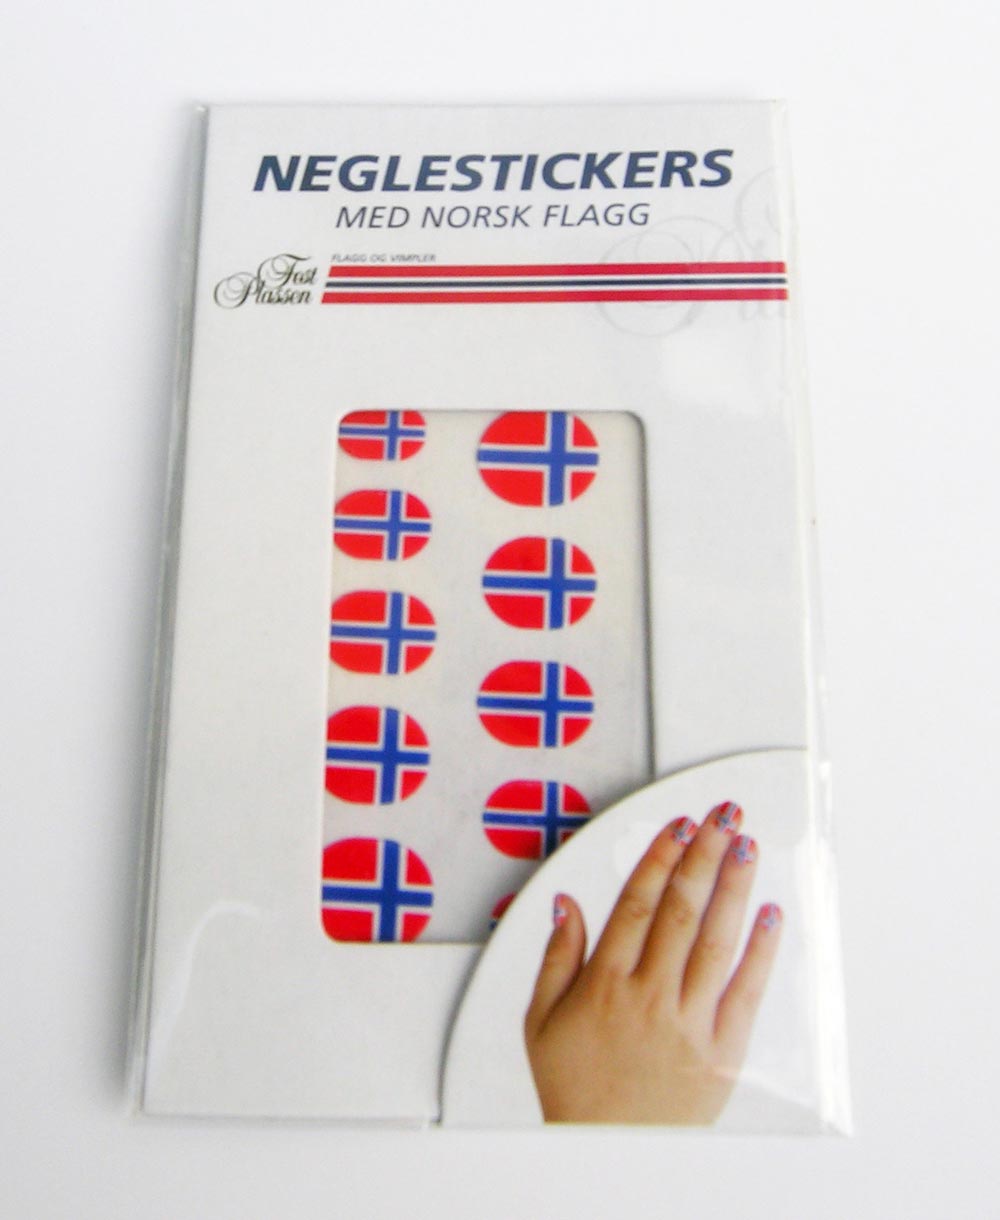 Neglestickers Norsk Flagg